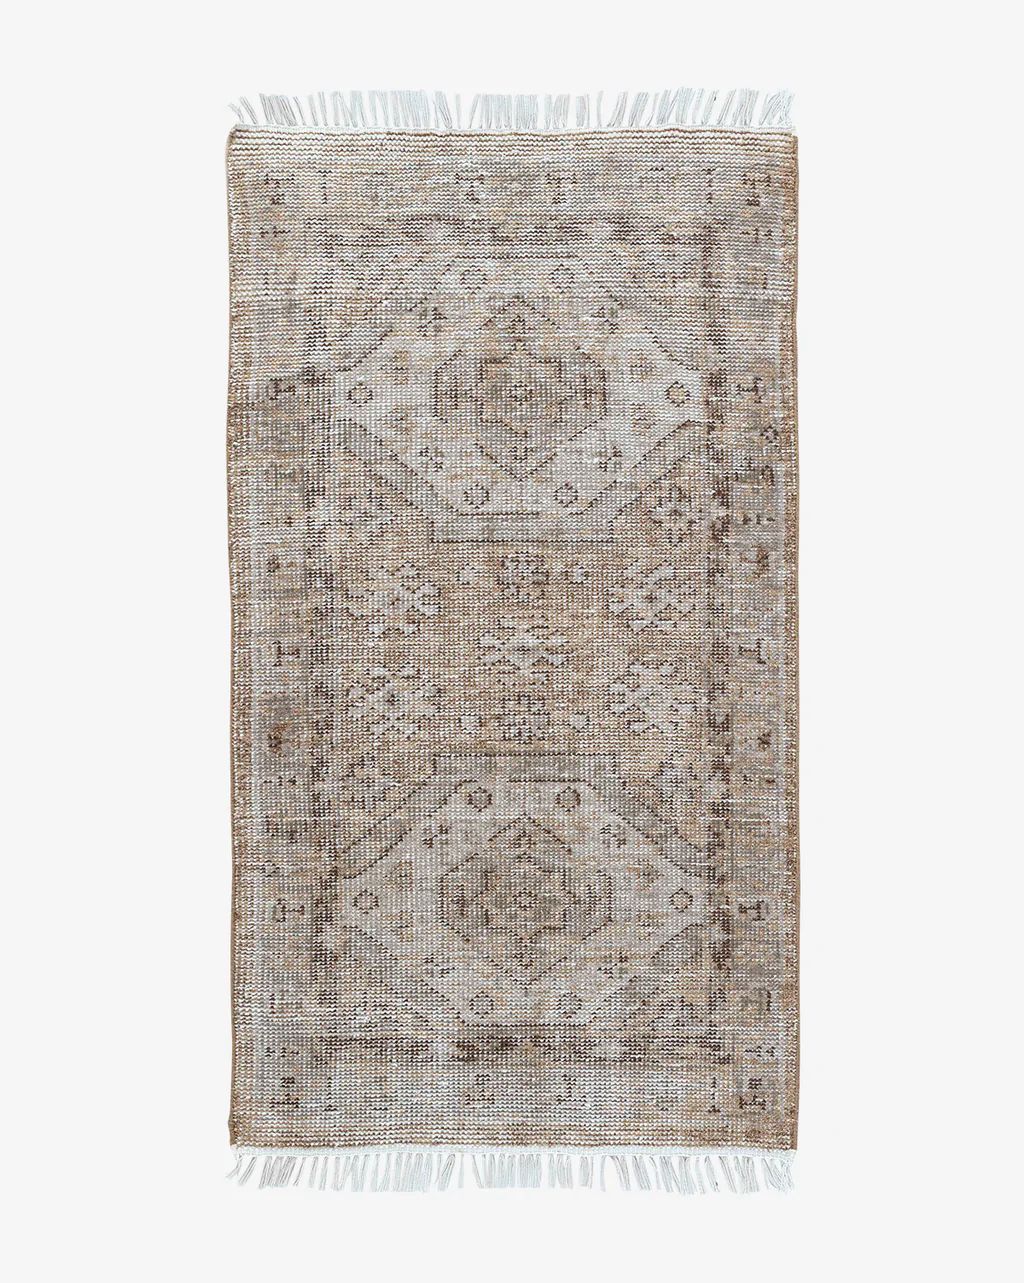 Charlot Hand-Knotted Rug | McGee & Co.